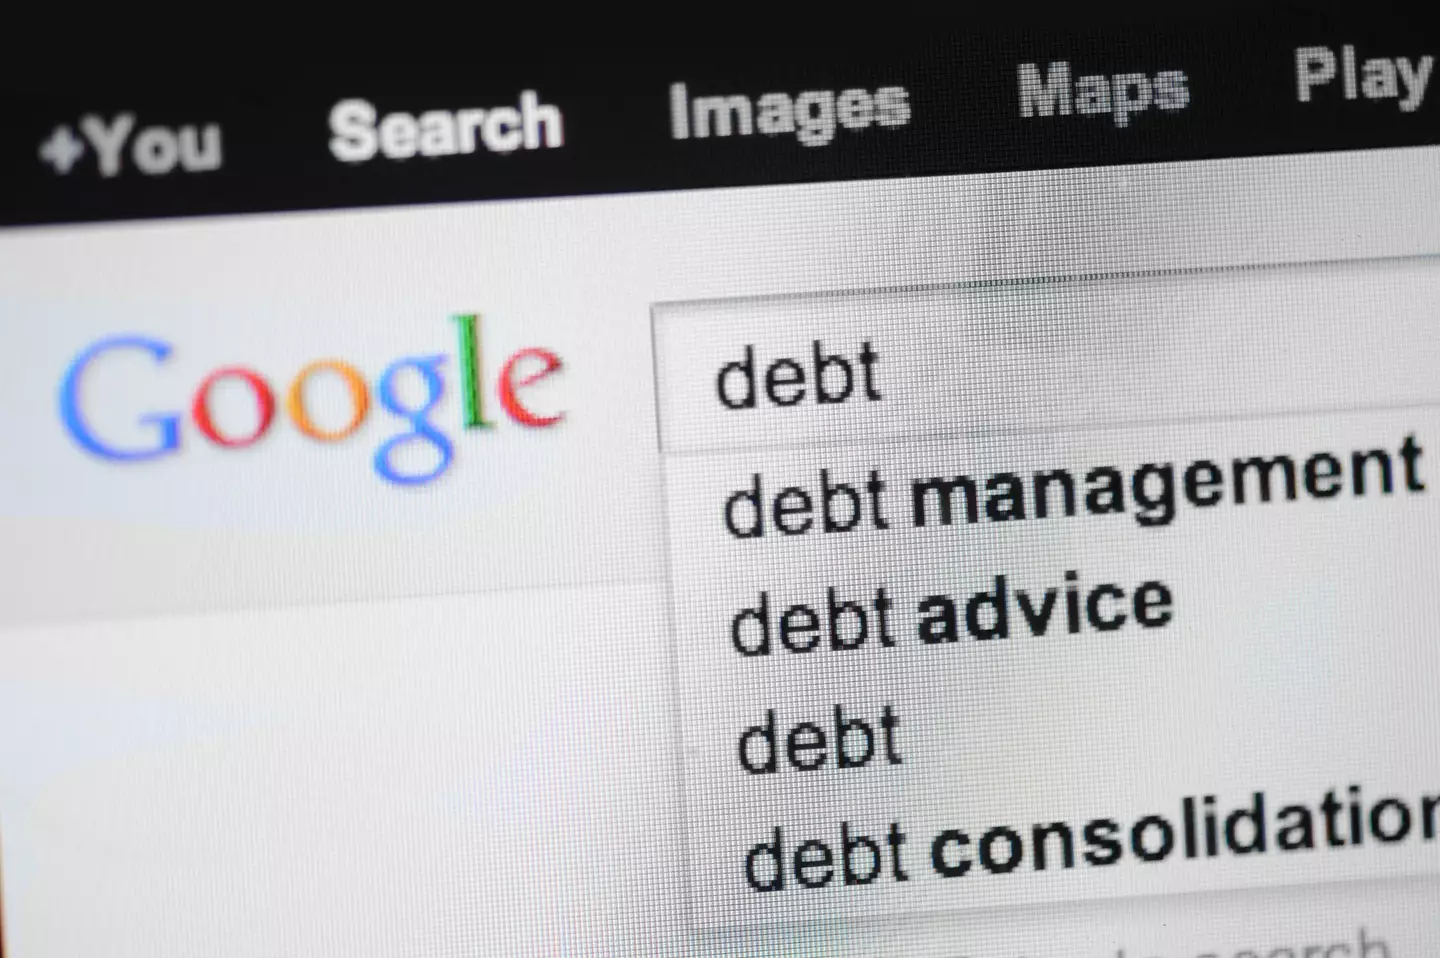 Fifteen percent of people said they will need to seek debt advice in the coming months.